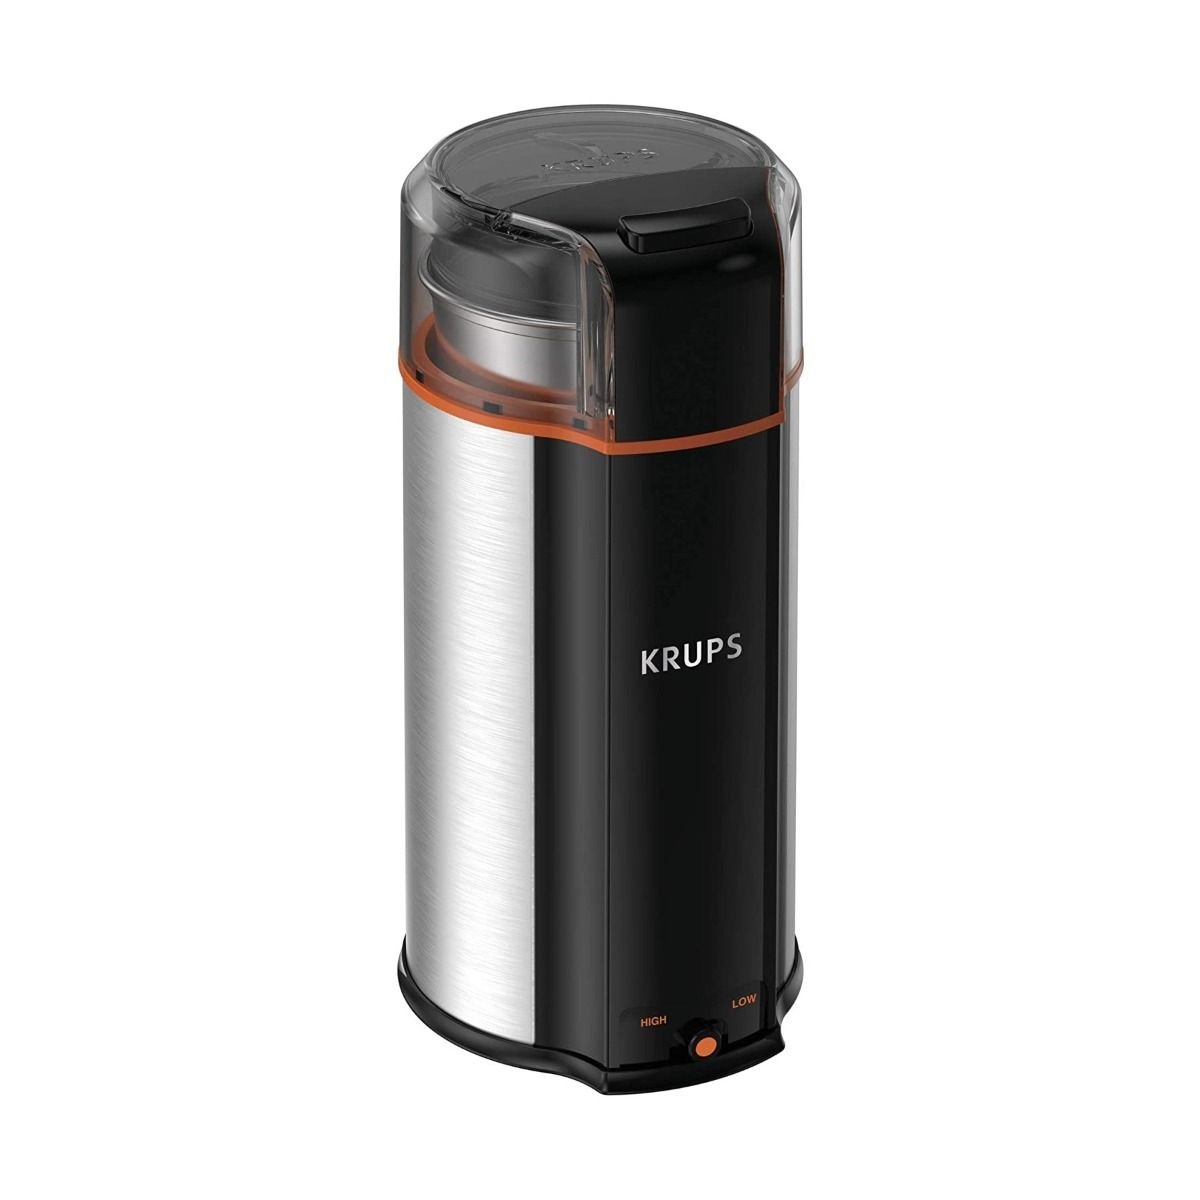 Grind coffee, spices, nuts, and more with this KRUPS electric